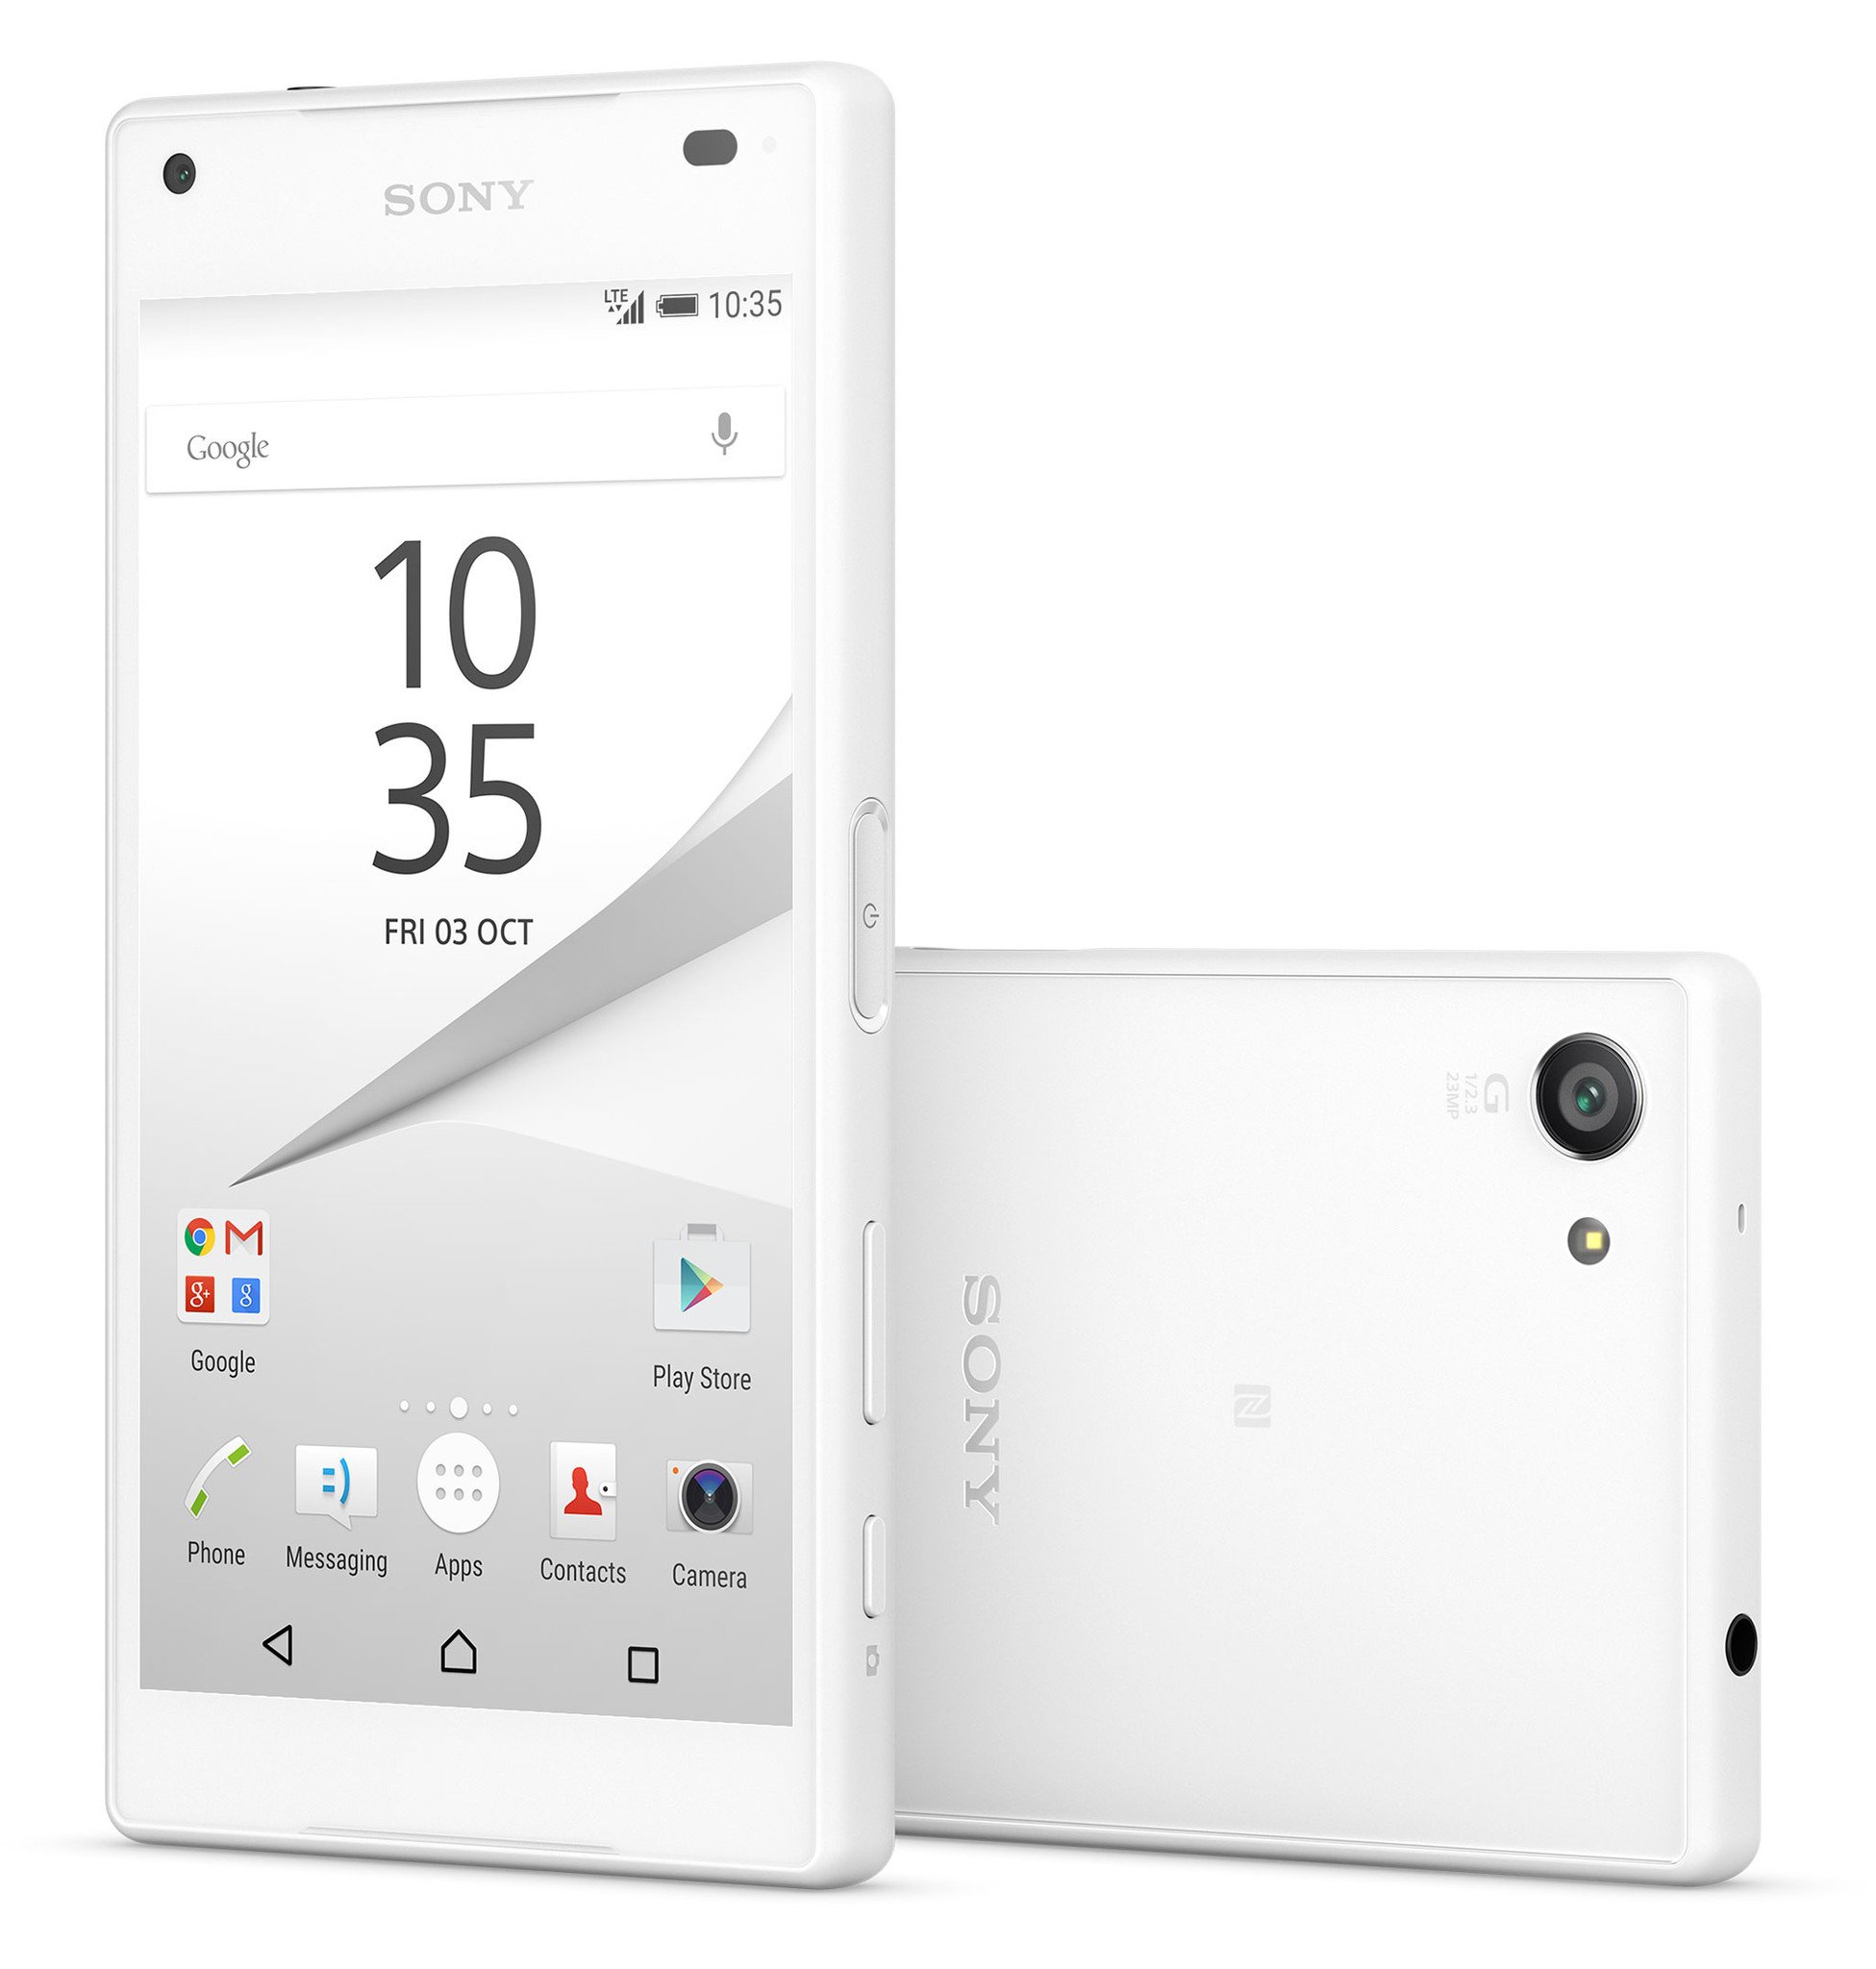 Sony Xperia Z5 Compact specs | Android Central